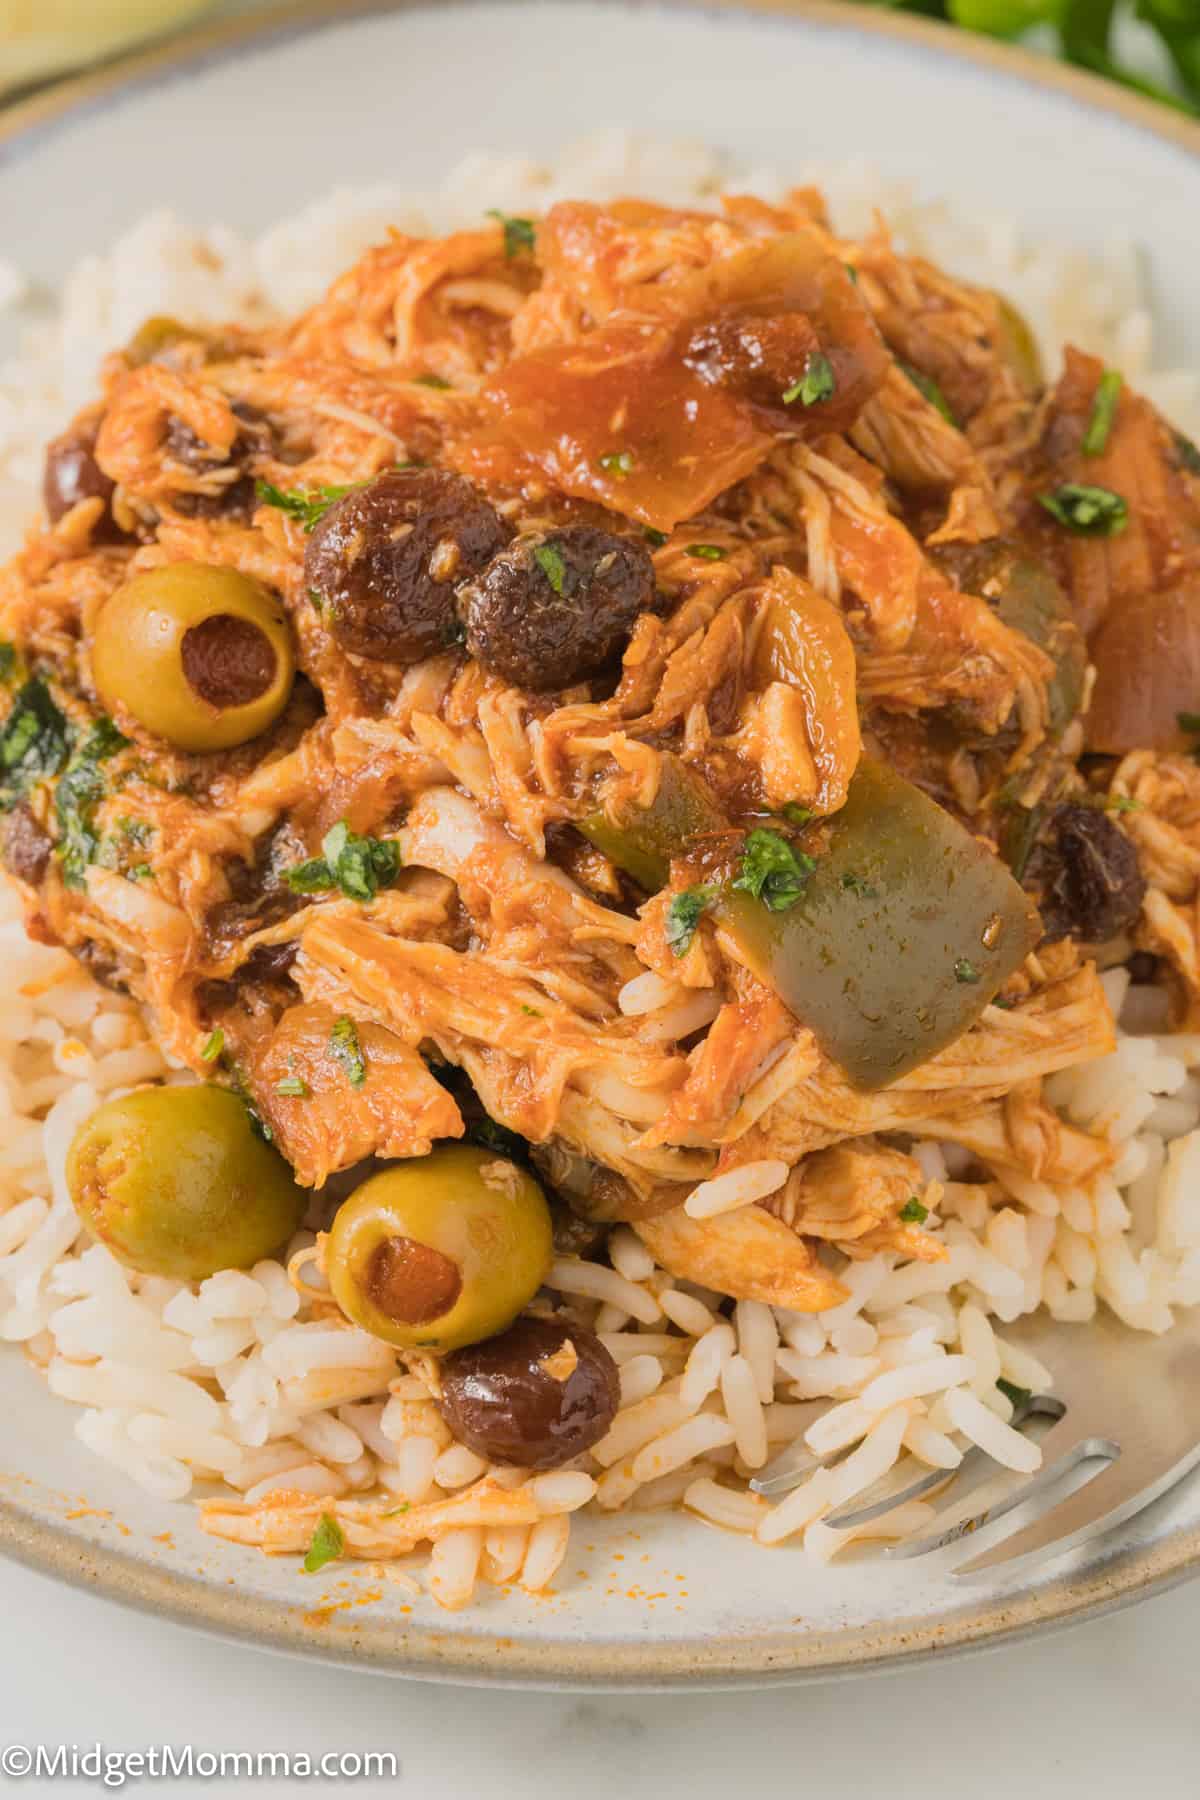 Slow Cooker Cuban Style Chicken Fricassee Recipe being served over rice